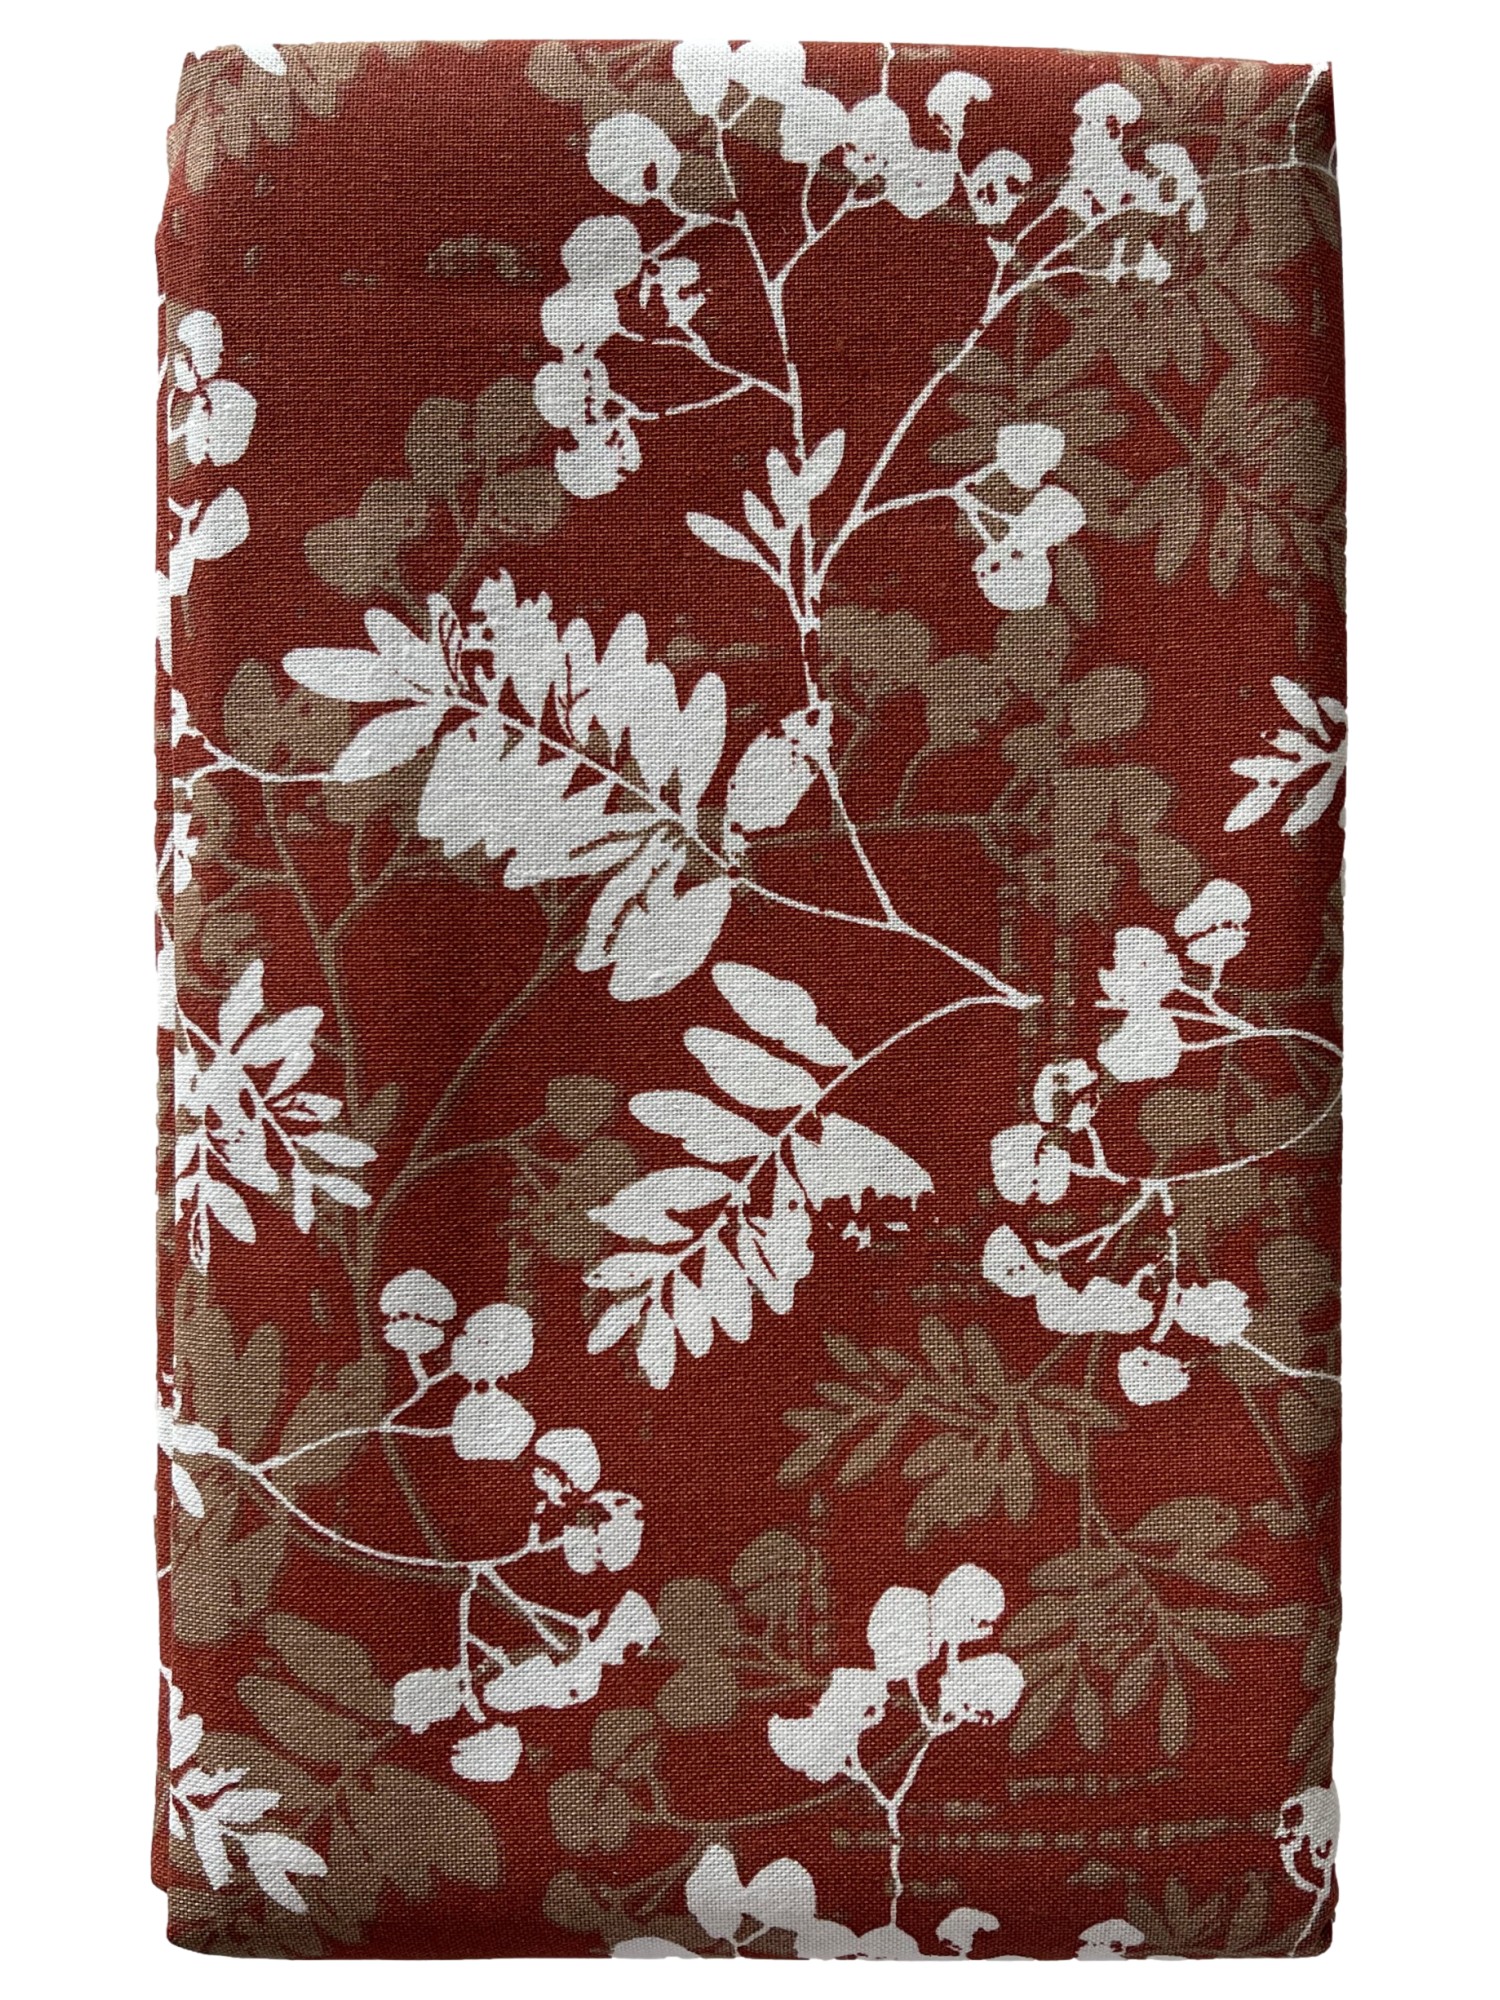 Autumn Foliage Fall Tablecloth with Rust & White Leaves 60x102 Obl